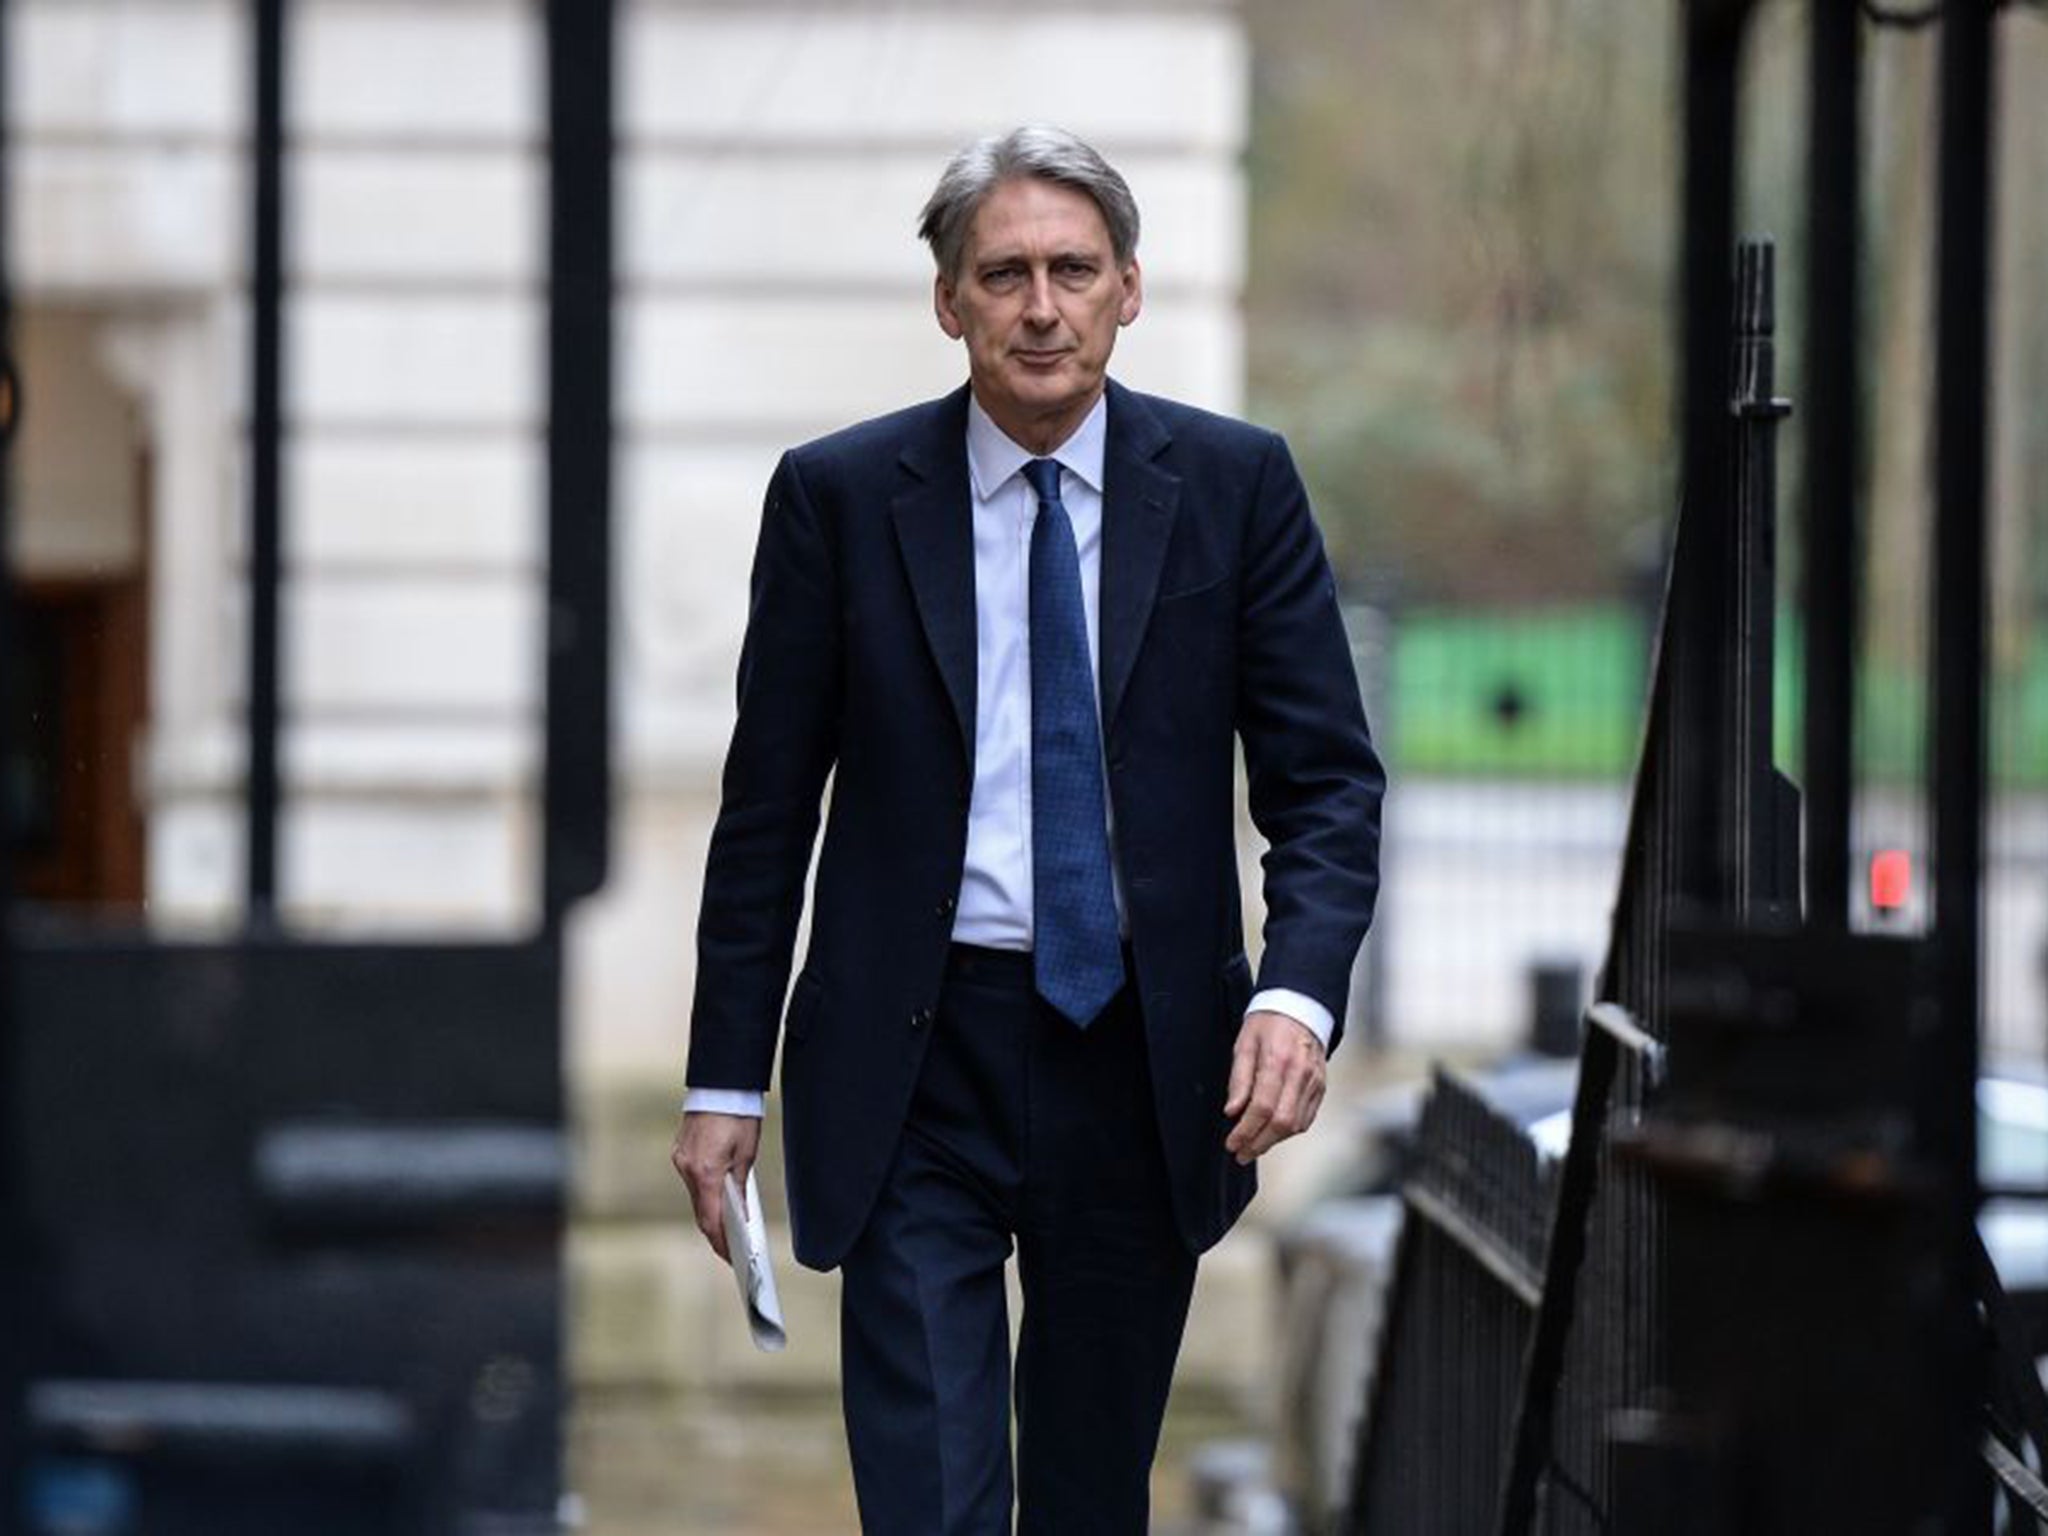 The foreign secretary reportedly hurled abuse at a Eurosceptic colleague